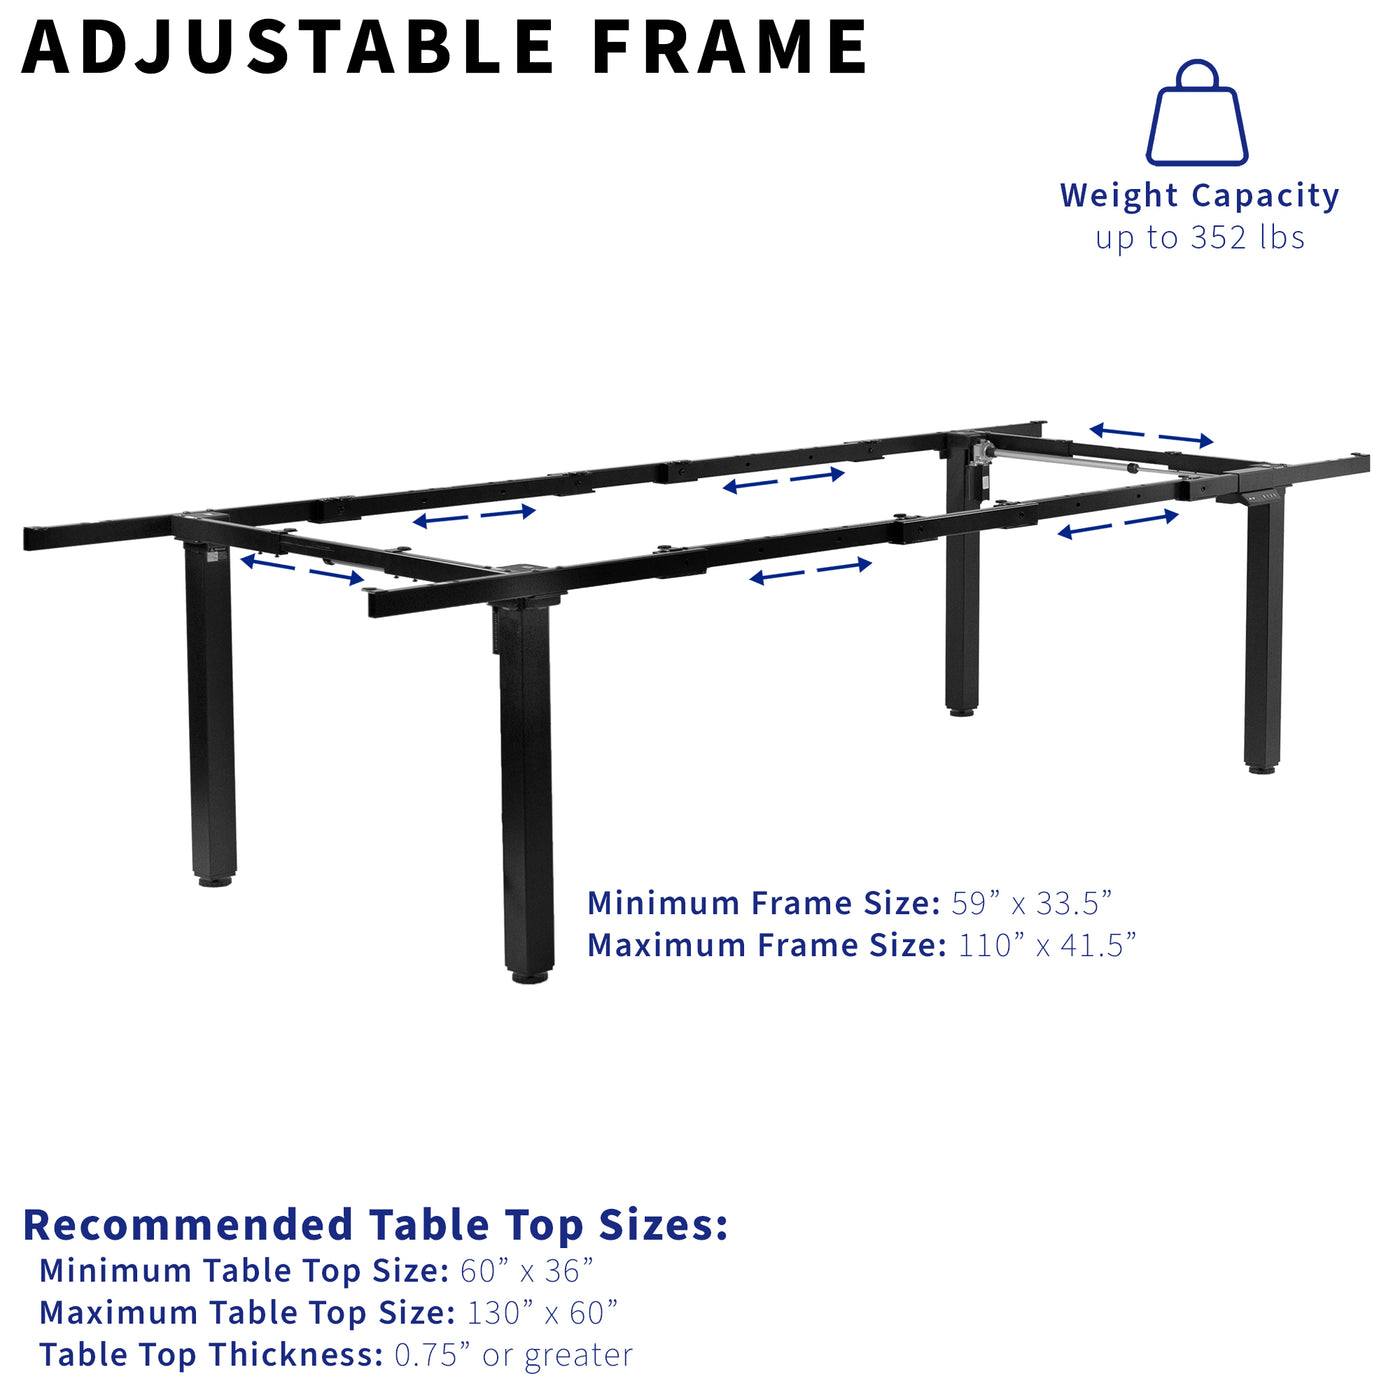 Adjustable Frame with recommended table top dimensions.